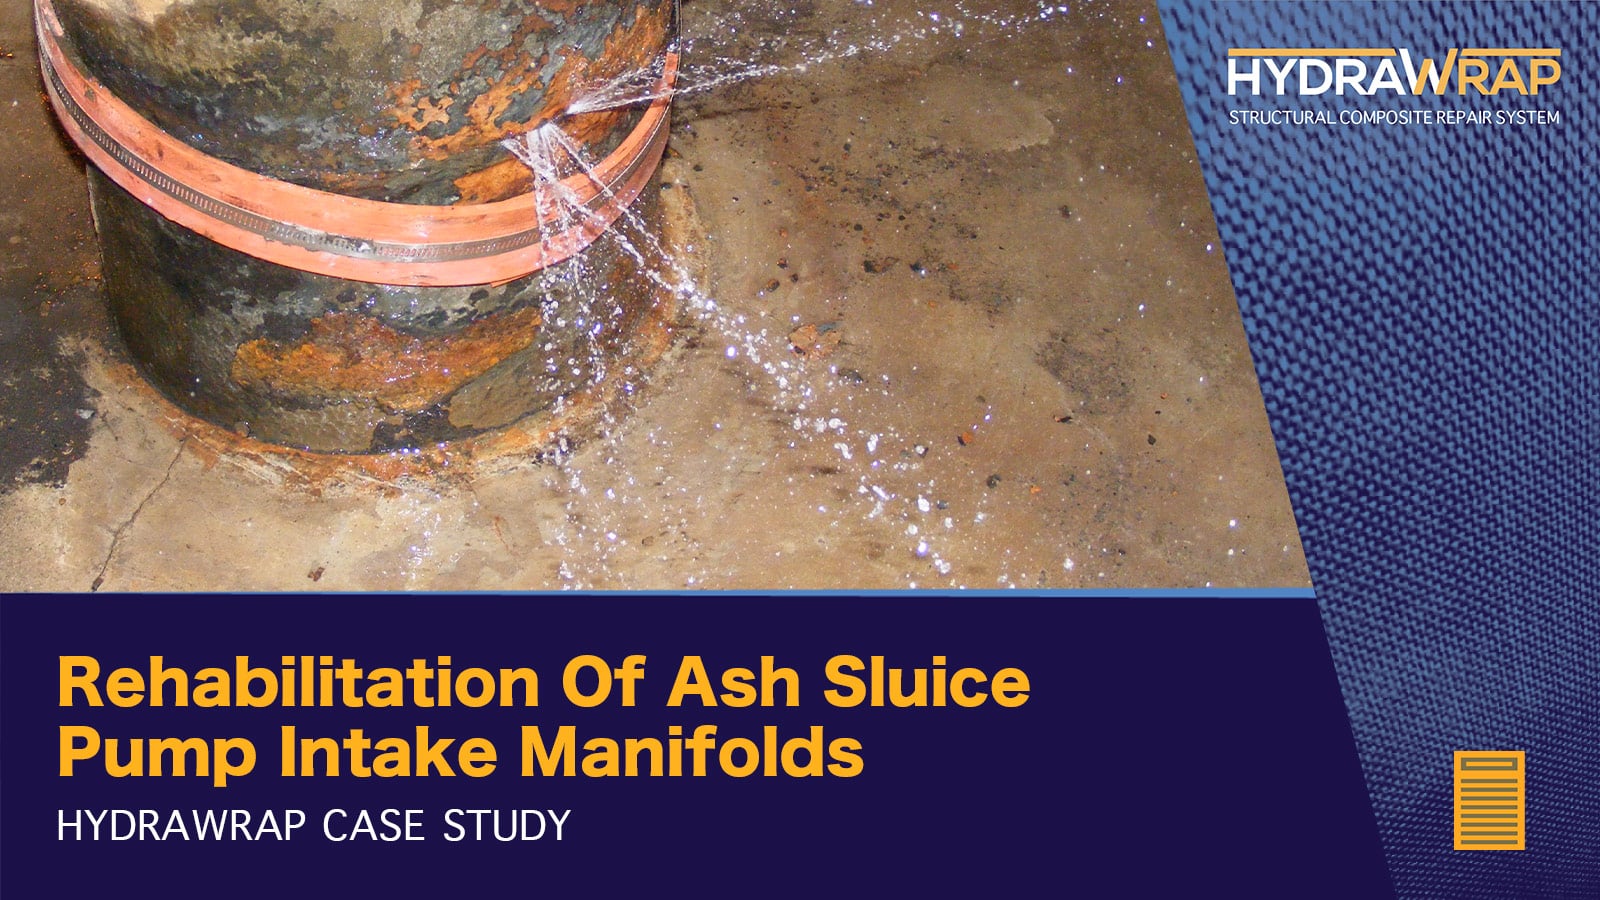 Water spraying out of an ash sluice pump intake manifold, 'Rehabilitation Of Ash Sluice Pump Intake Manifolds, HydraWrap Case Study'